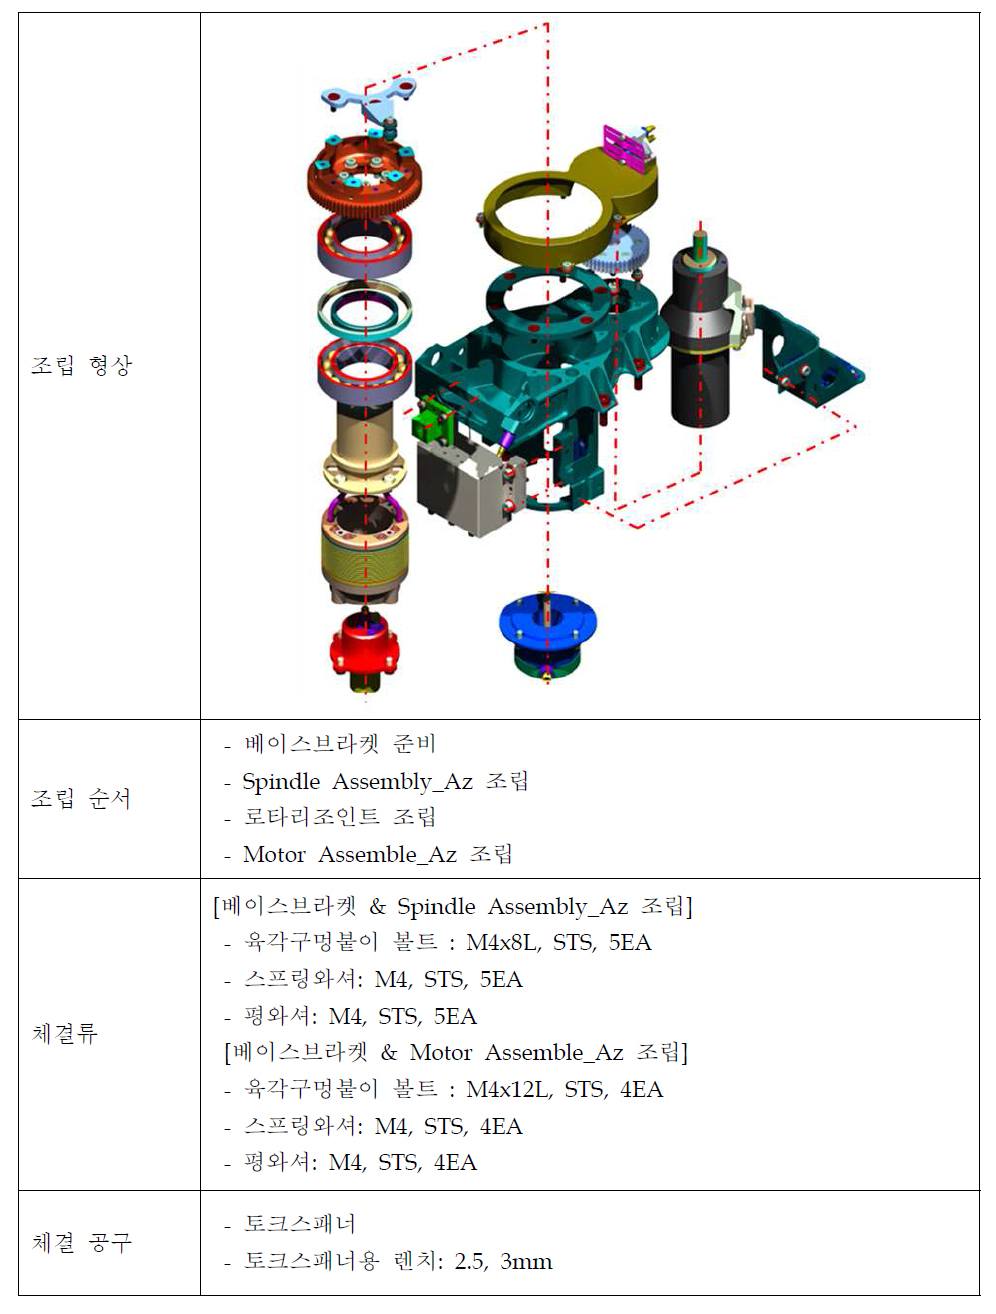 Azimuth assembly 조립 절차도